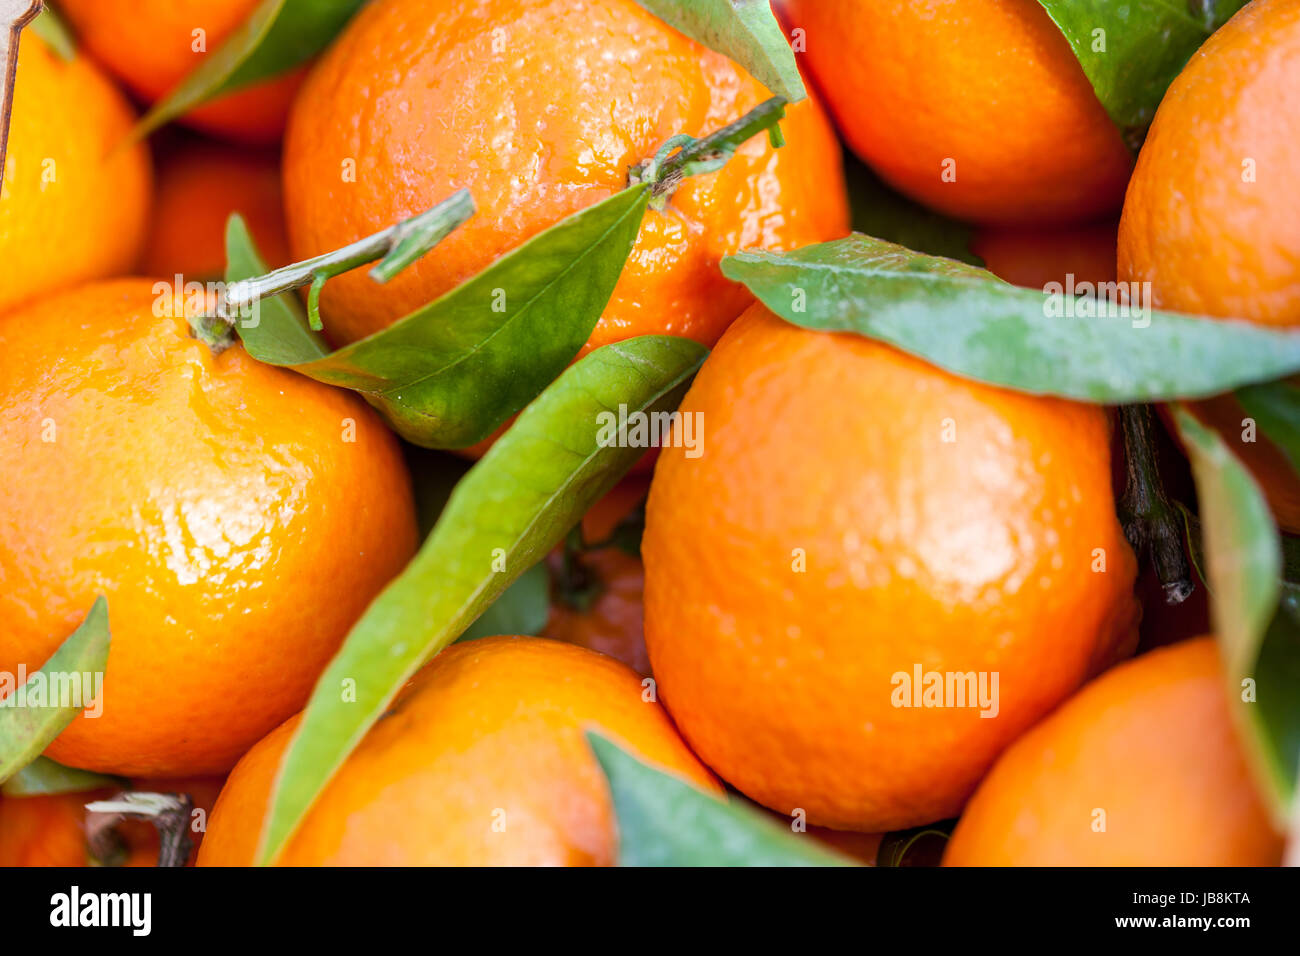 images mandarine photography stock - Alamy hi-res and Clementinen